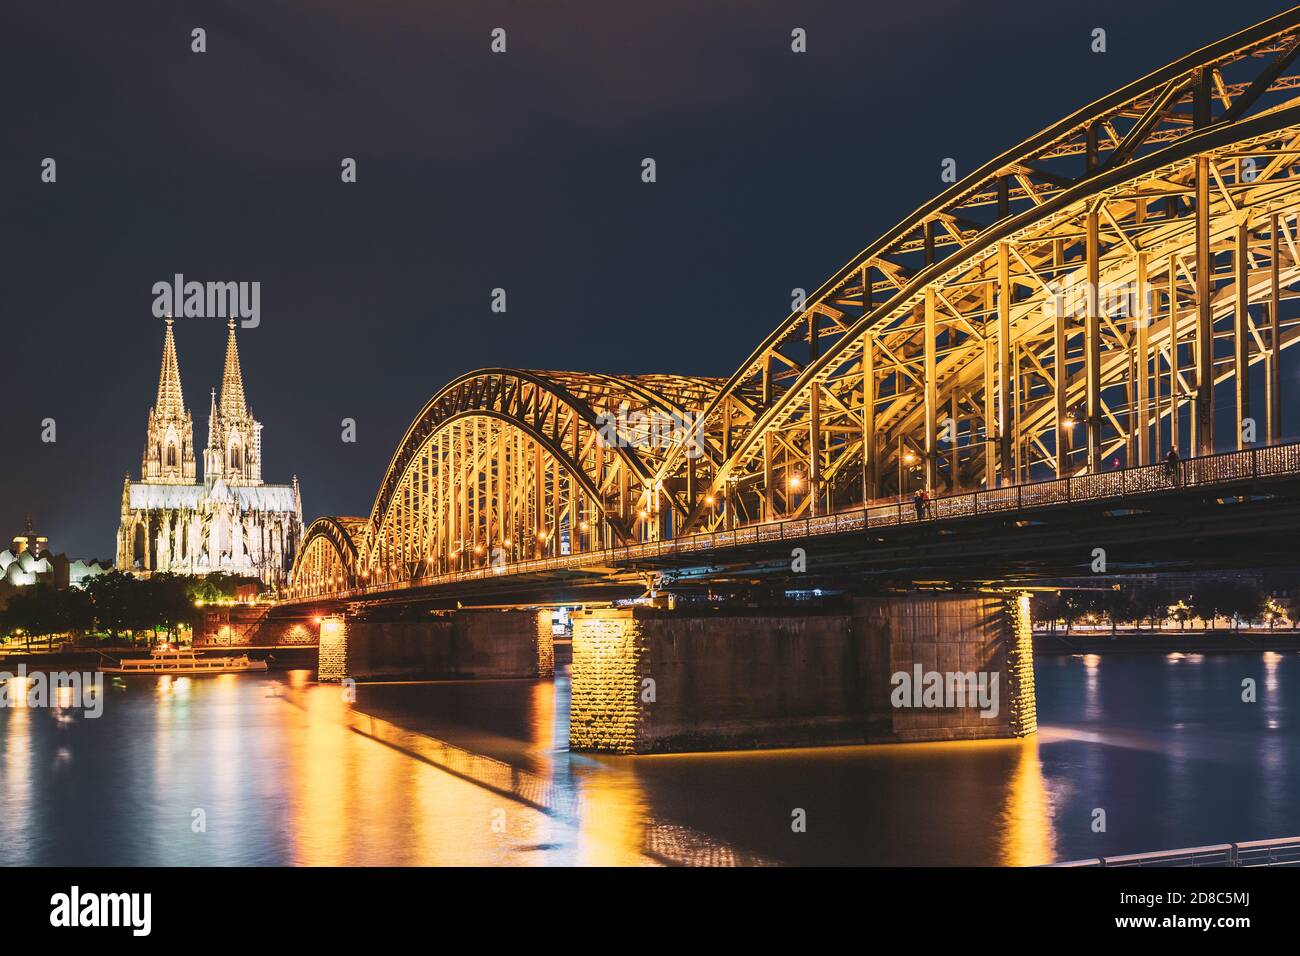 Cologne, Germany. Night View Of Cologne Cathedral And Hohenzollern Bridge. Gothic Cathedral In Dusk, Evening. UNESCO World Heritage Site. Famous Place Stock Photo